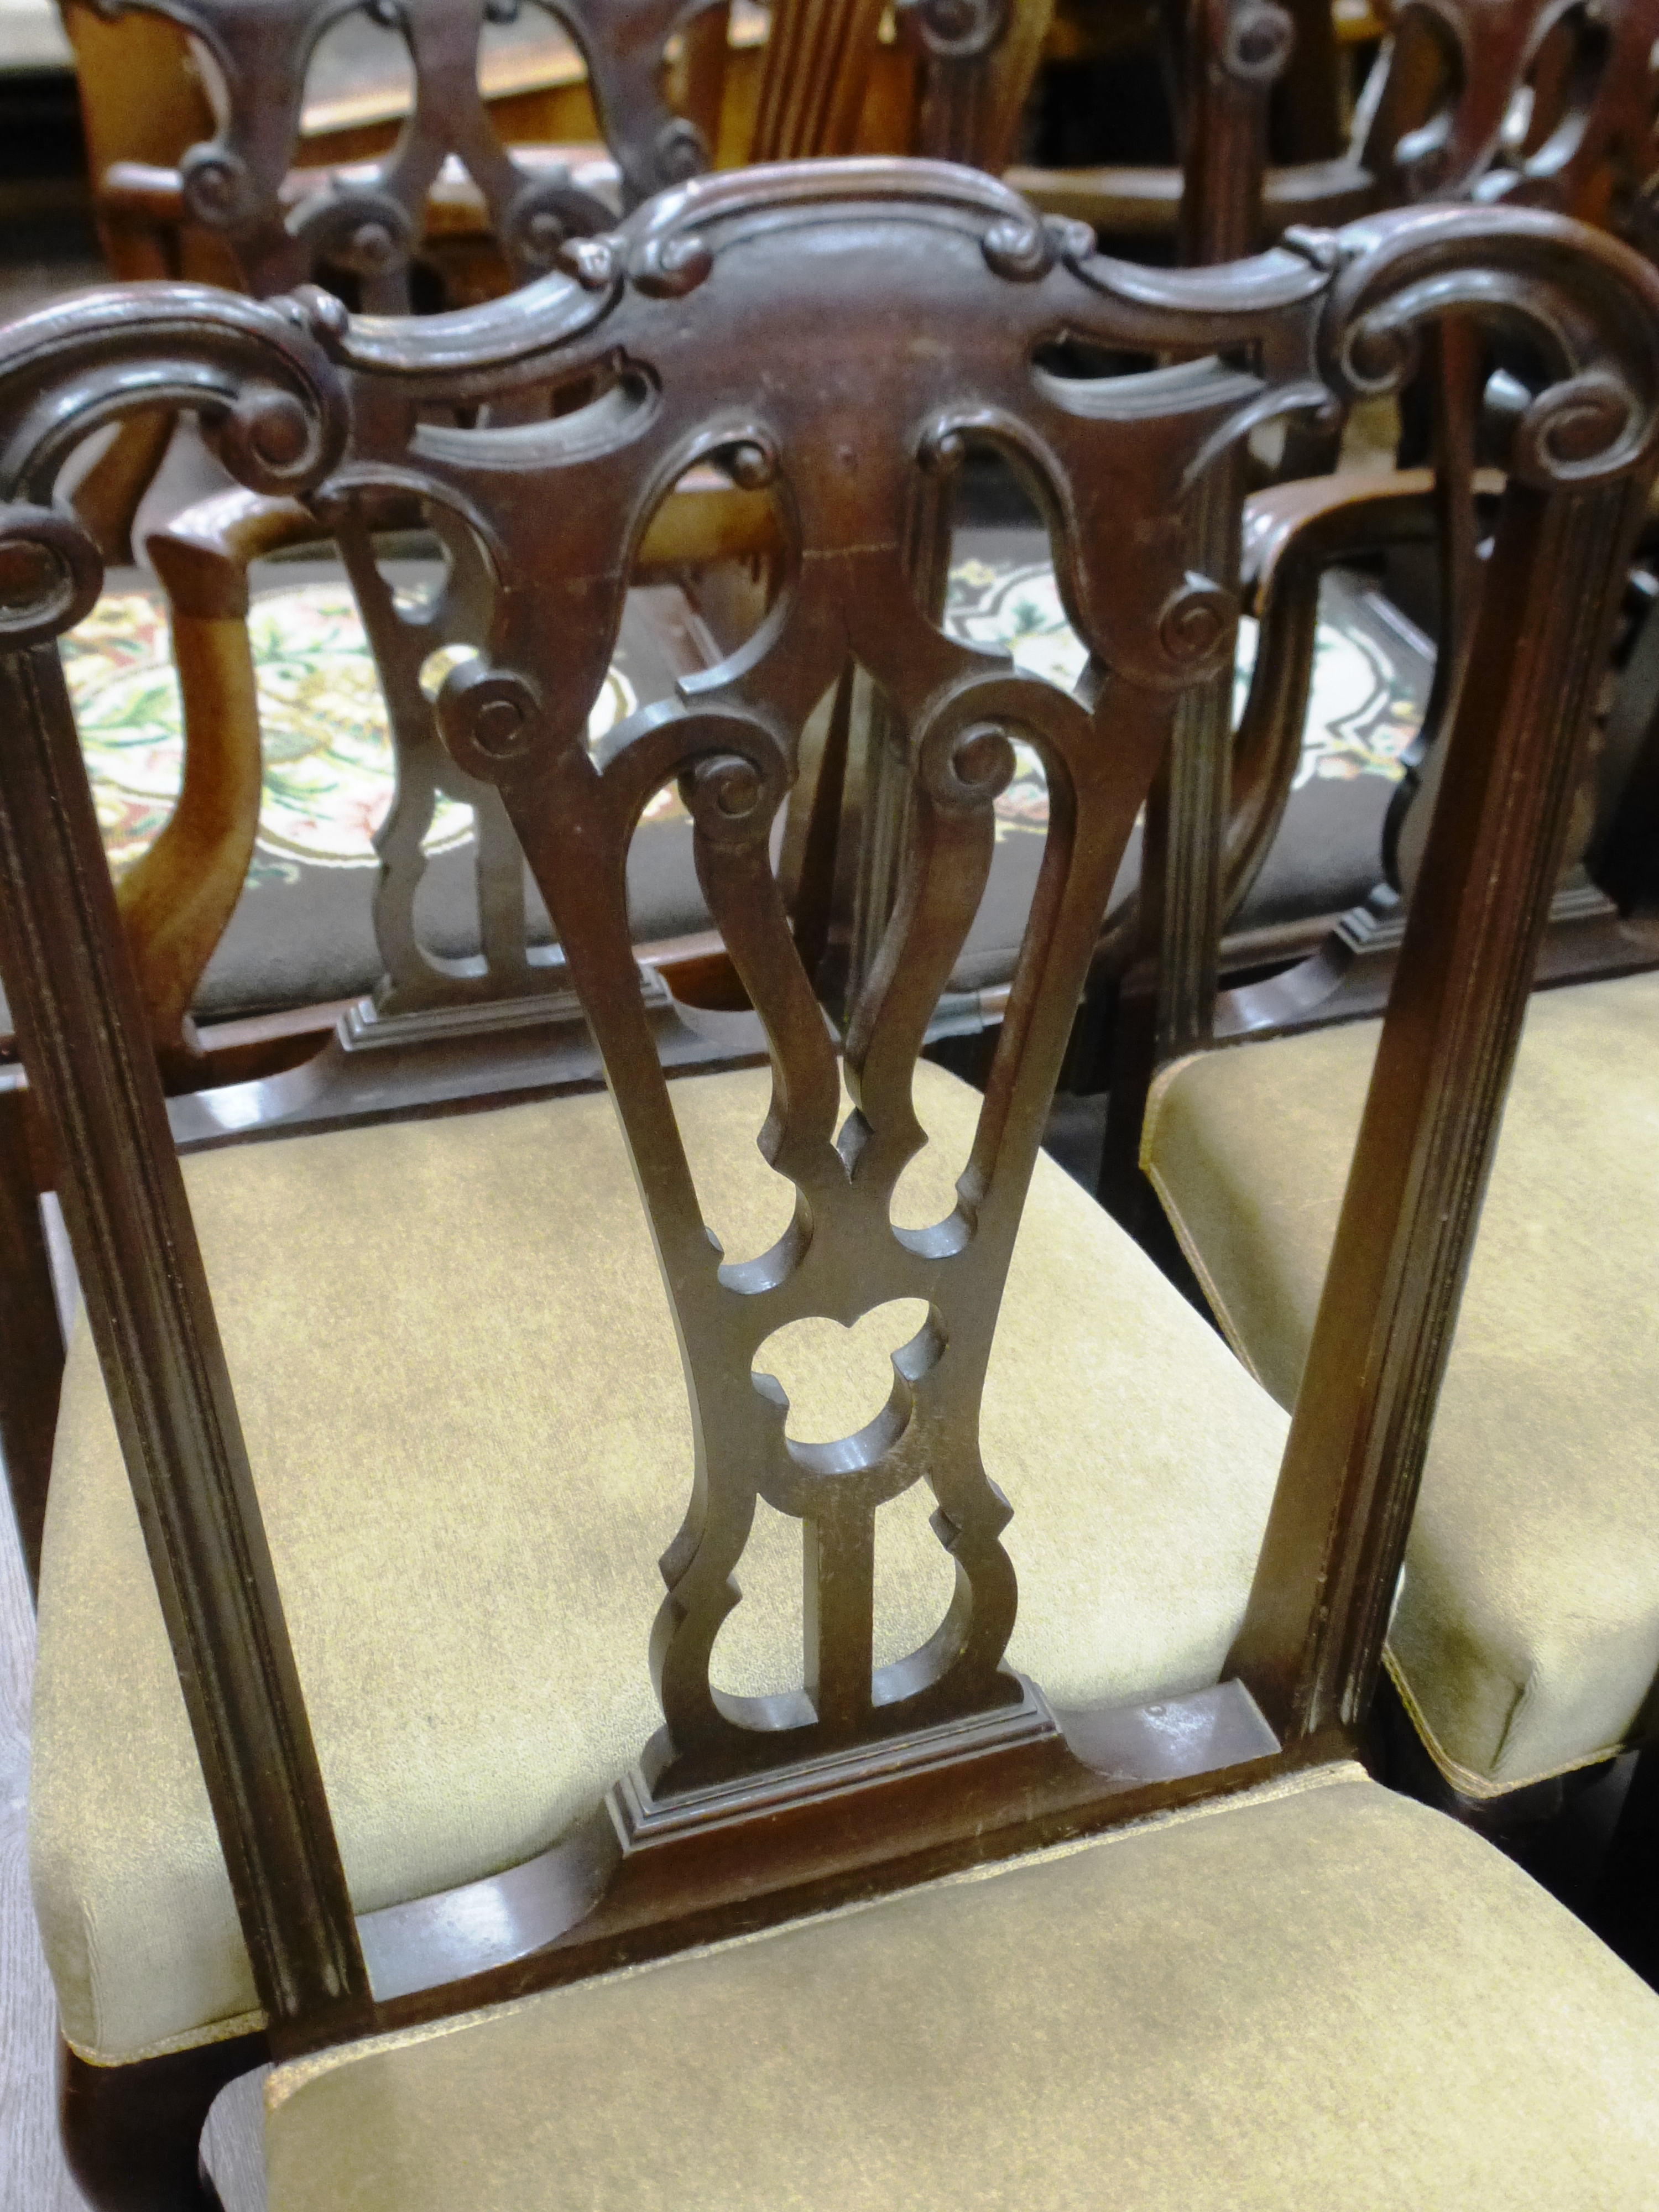 SET OF 6 CARVED CHAIRS - Image 5 of 5